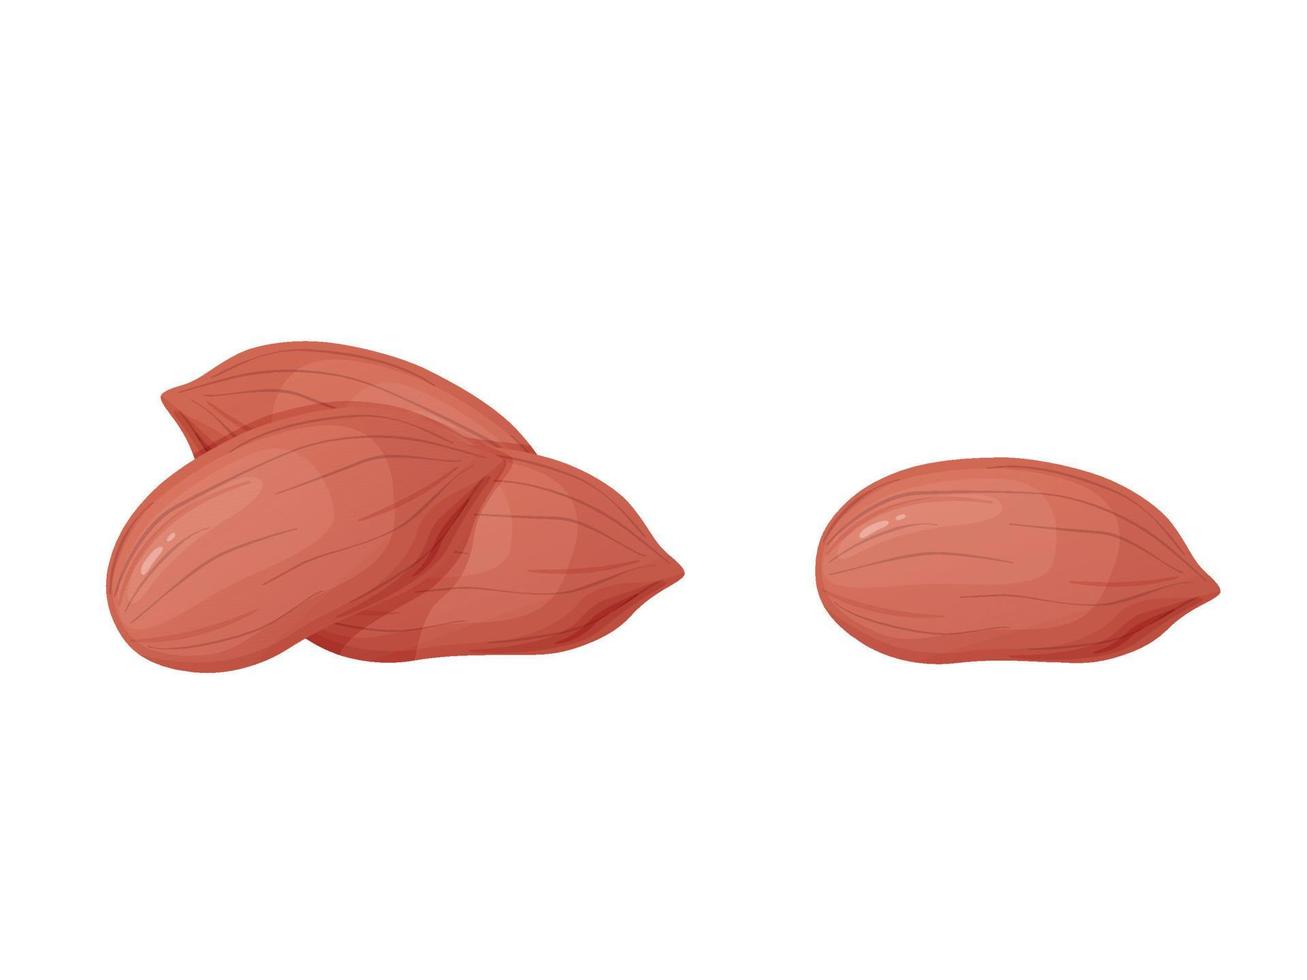 Peanut. Nuts in shell and peeled in cartoon style. Healthy vegetarian snack. vector